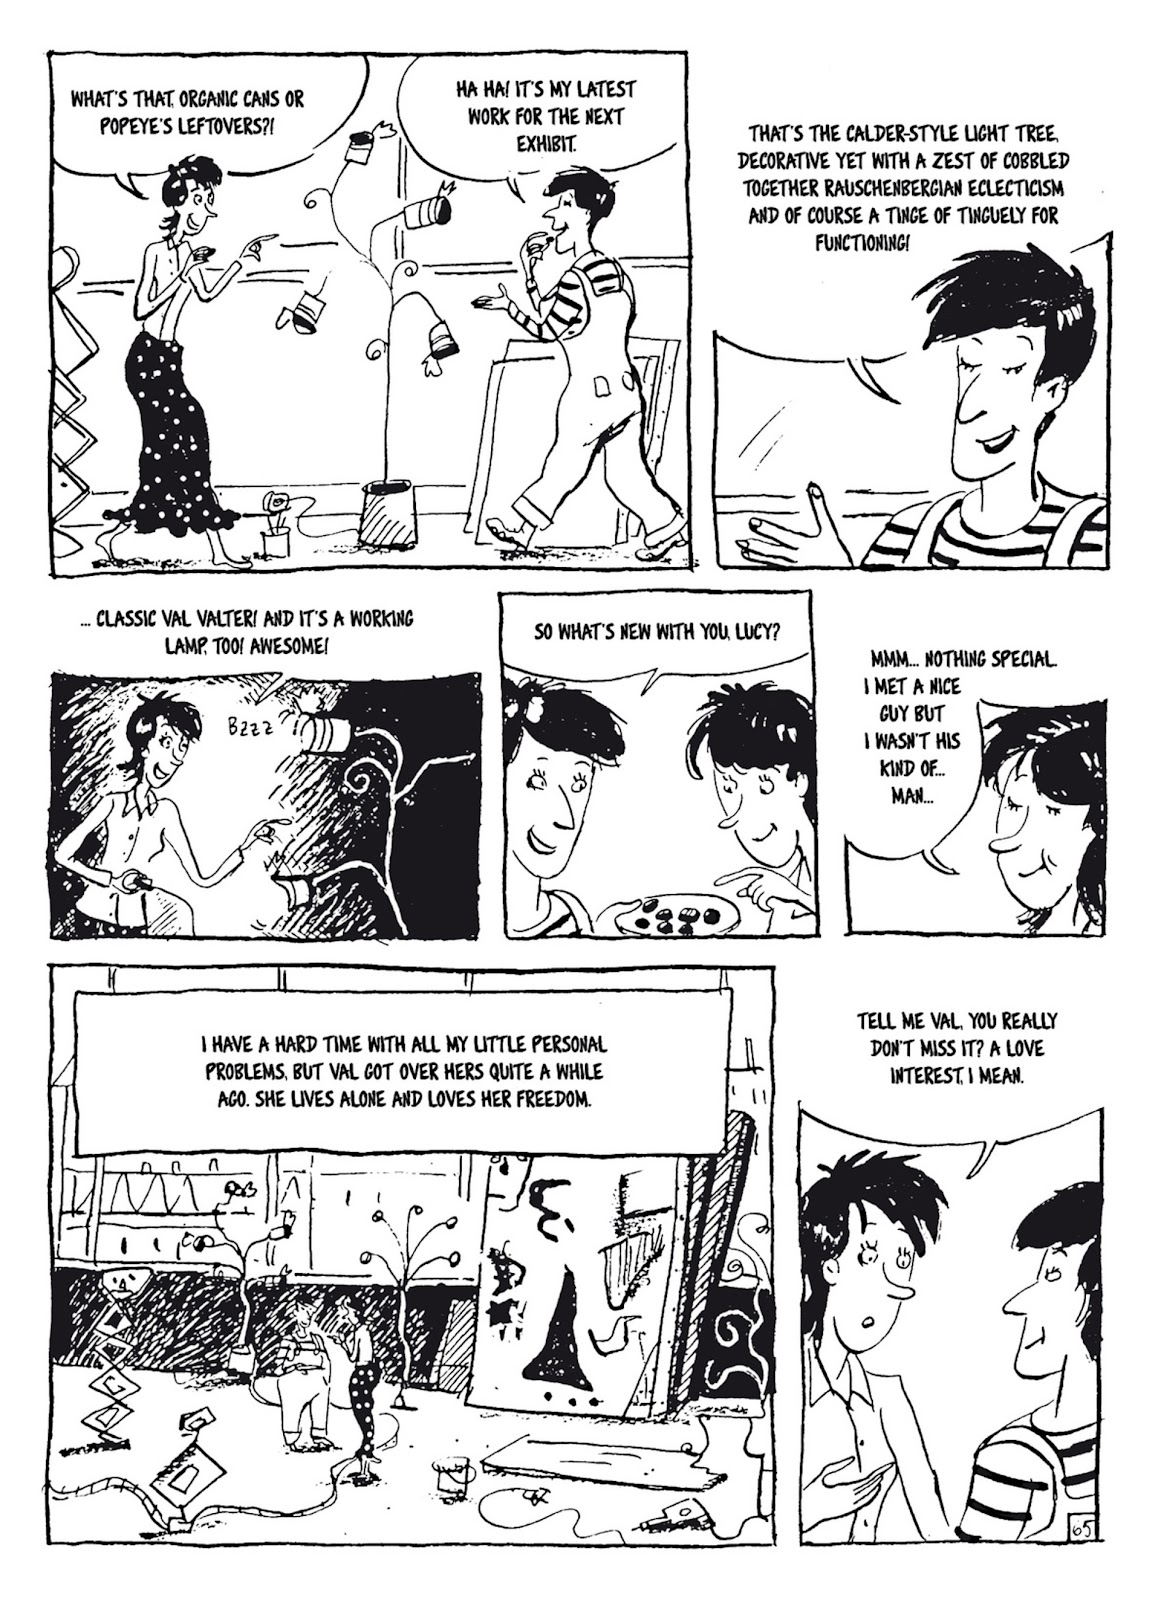 Bluesy Lucy - The Existential Chronicles of a Thirtysomething issue 2 - Page 20